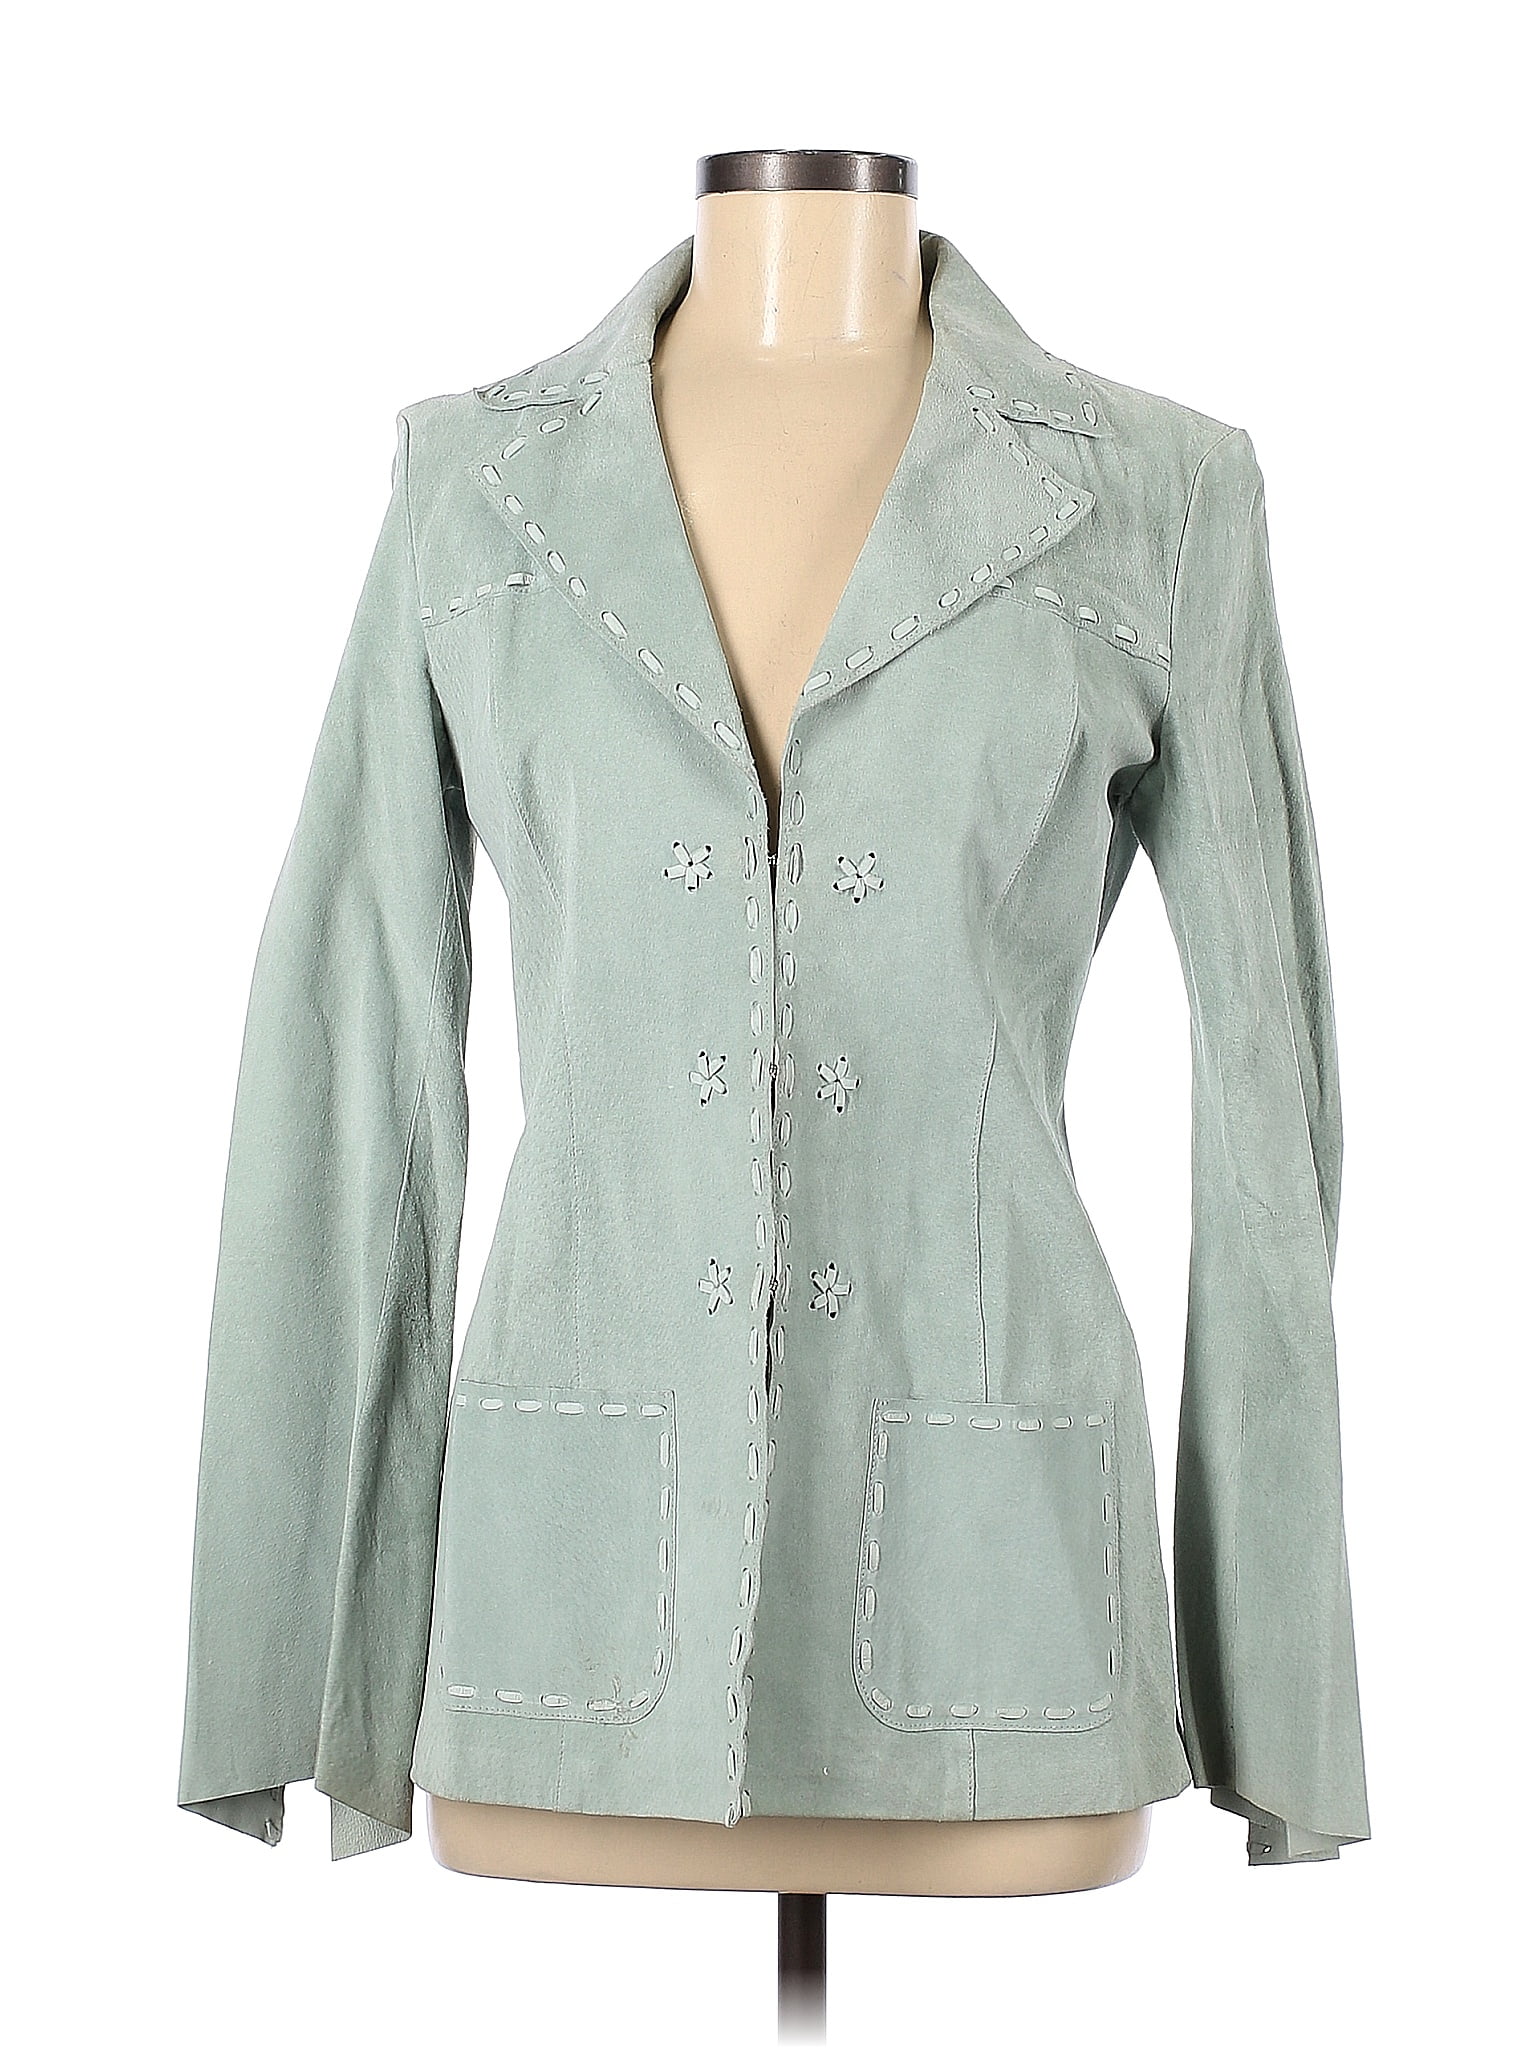 Laundry by Shelli Segal Solid Green Jacket Size 8 - 79% off | thredUP